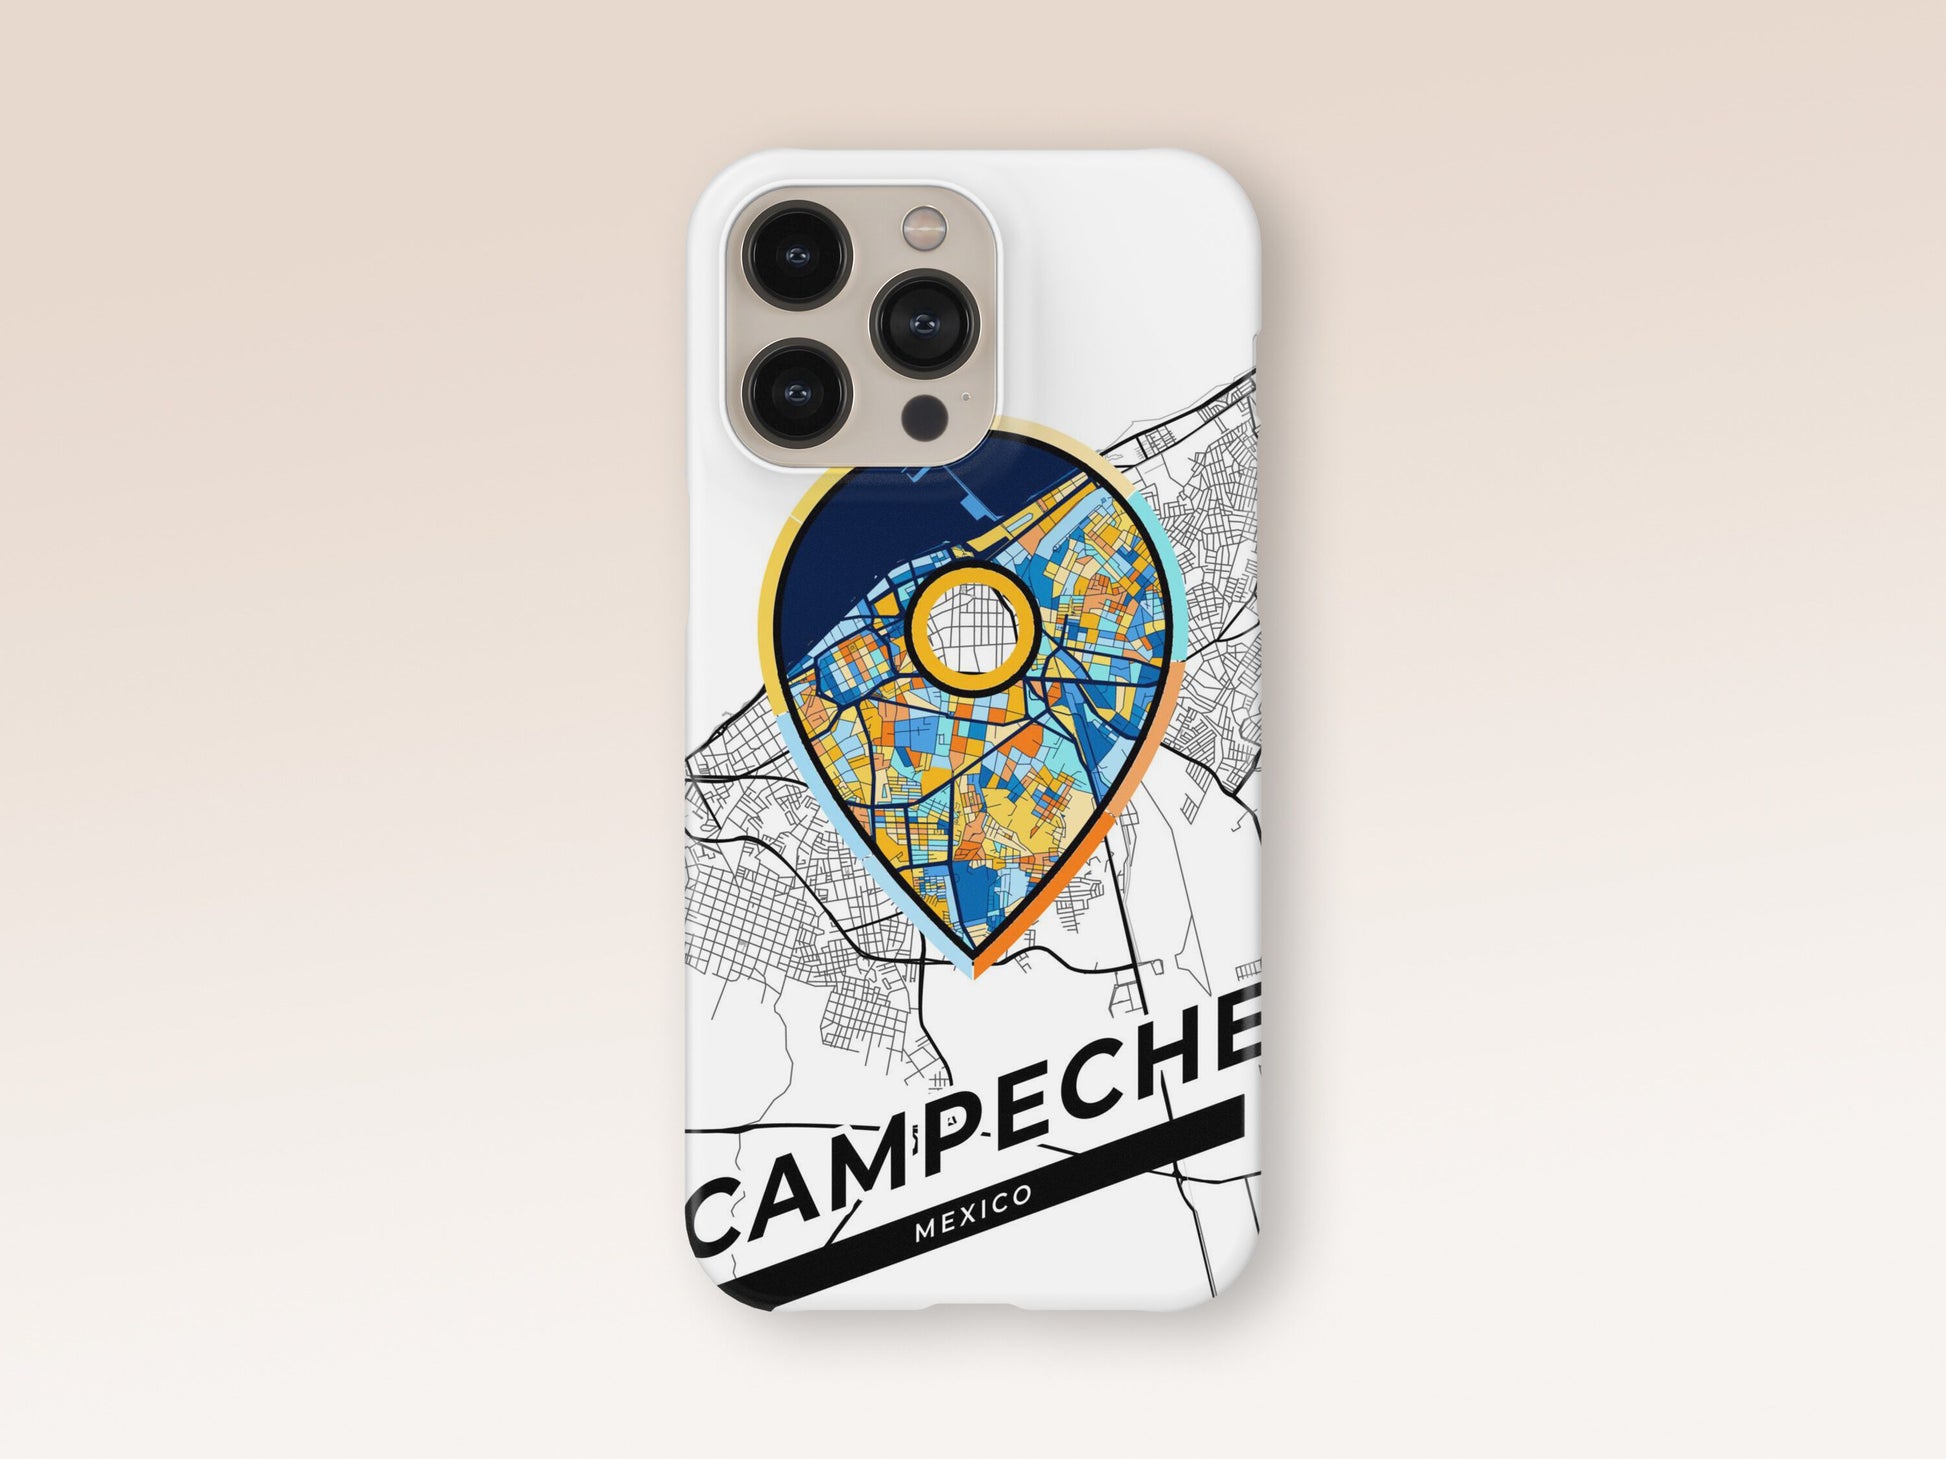 Campeche Mexico slim phone case with colorful icon. Birthday, wedding or housewarming gift. Couple match cases. 1